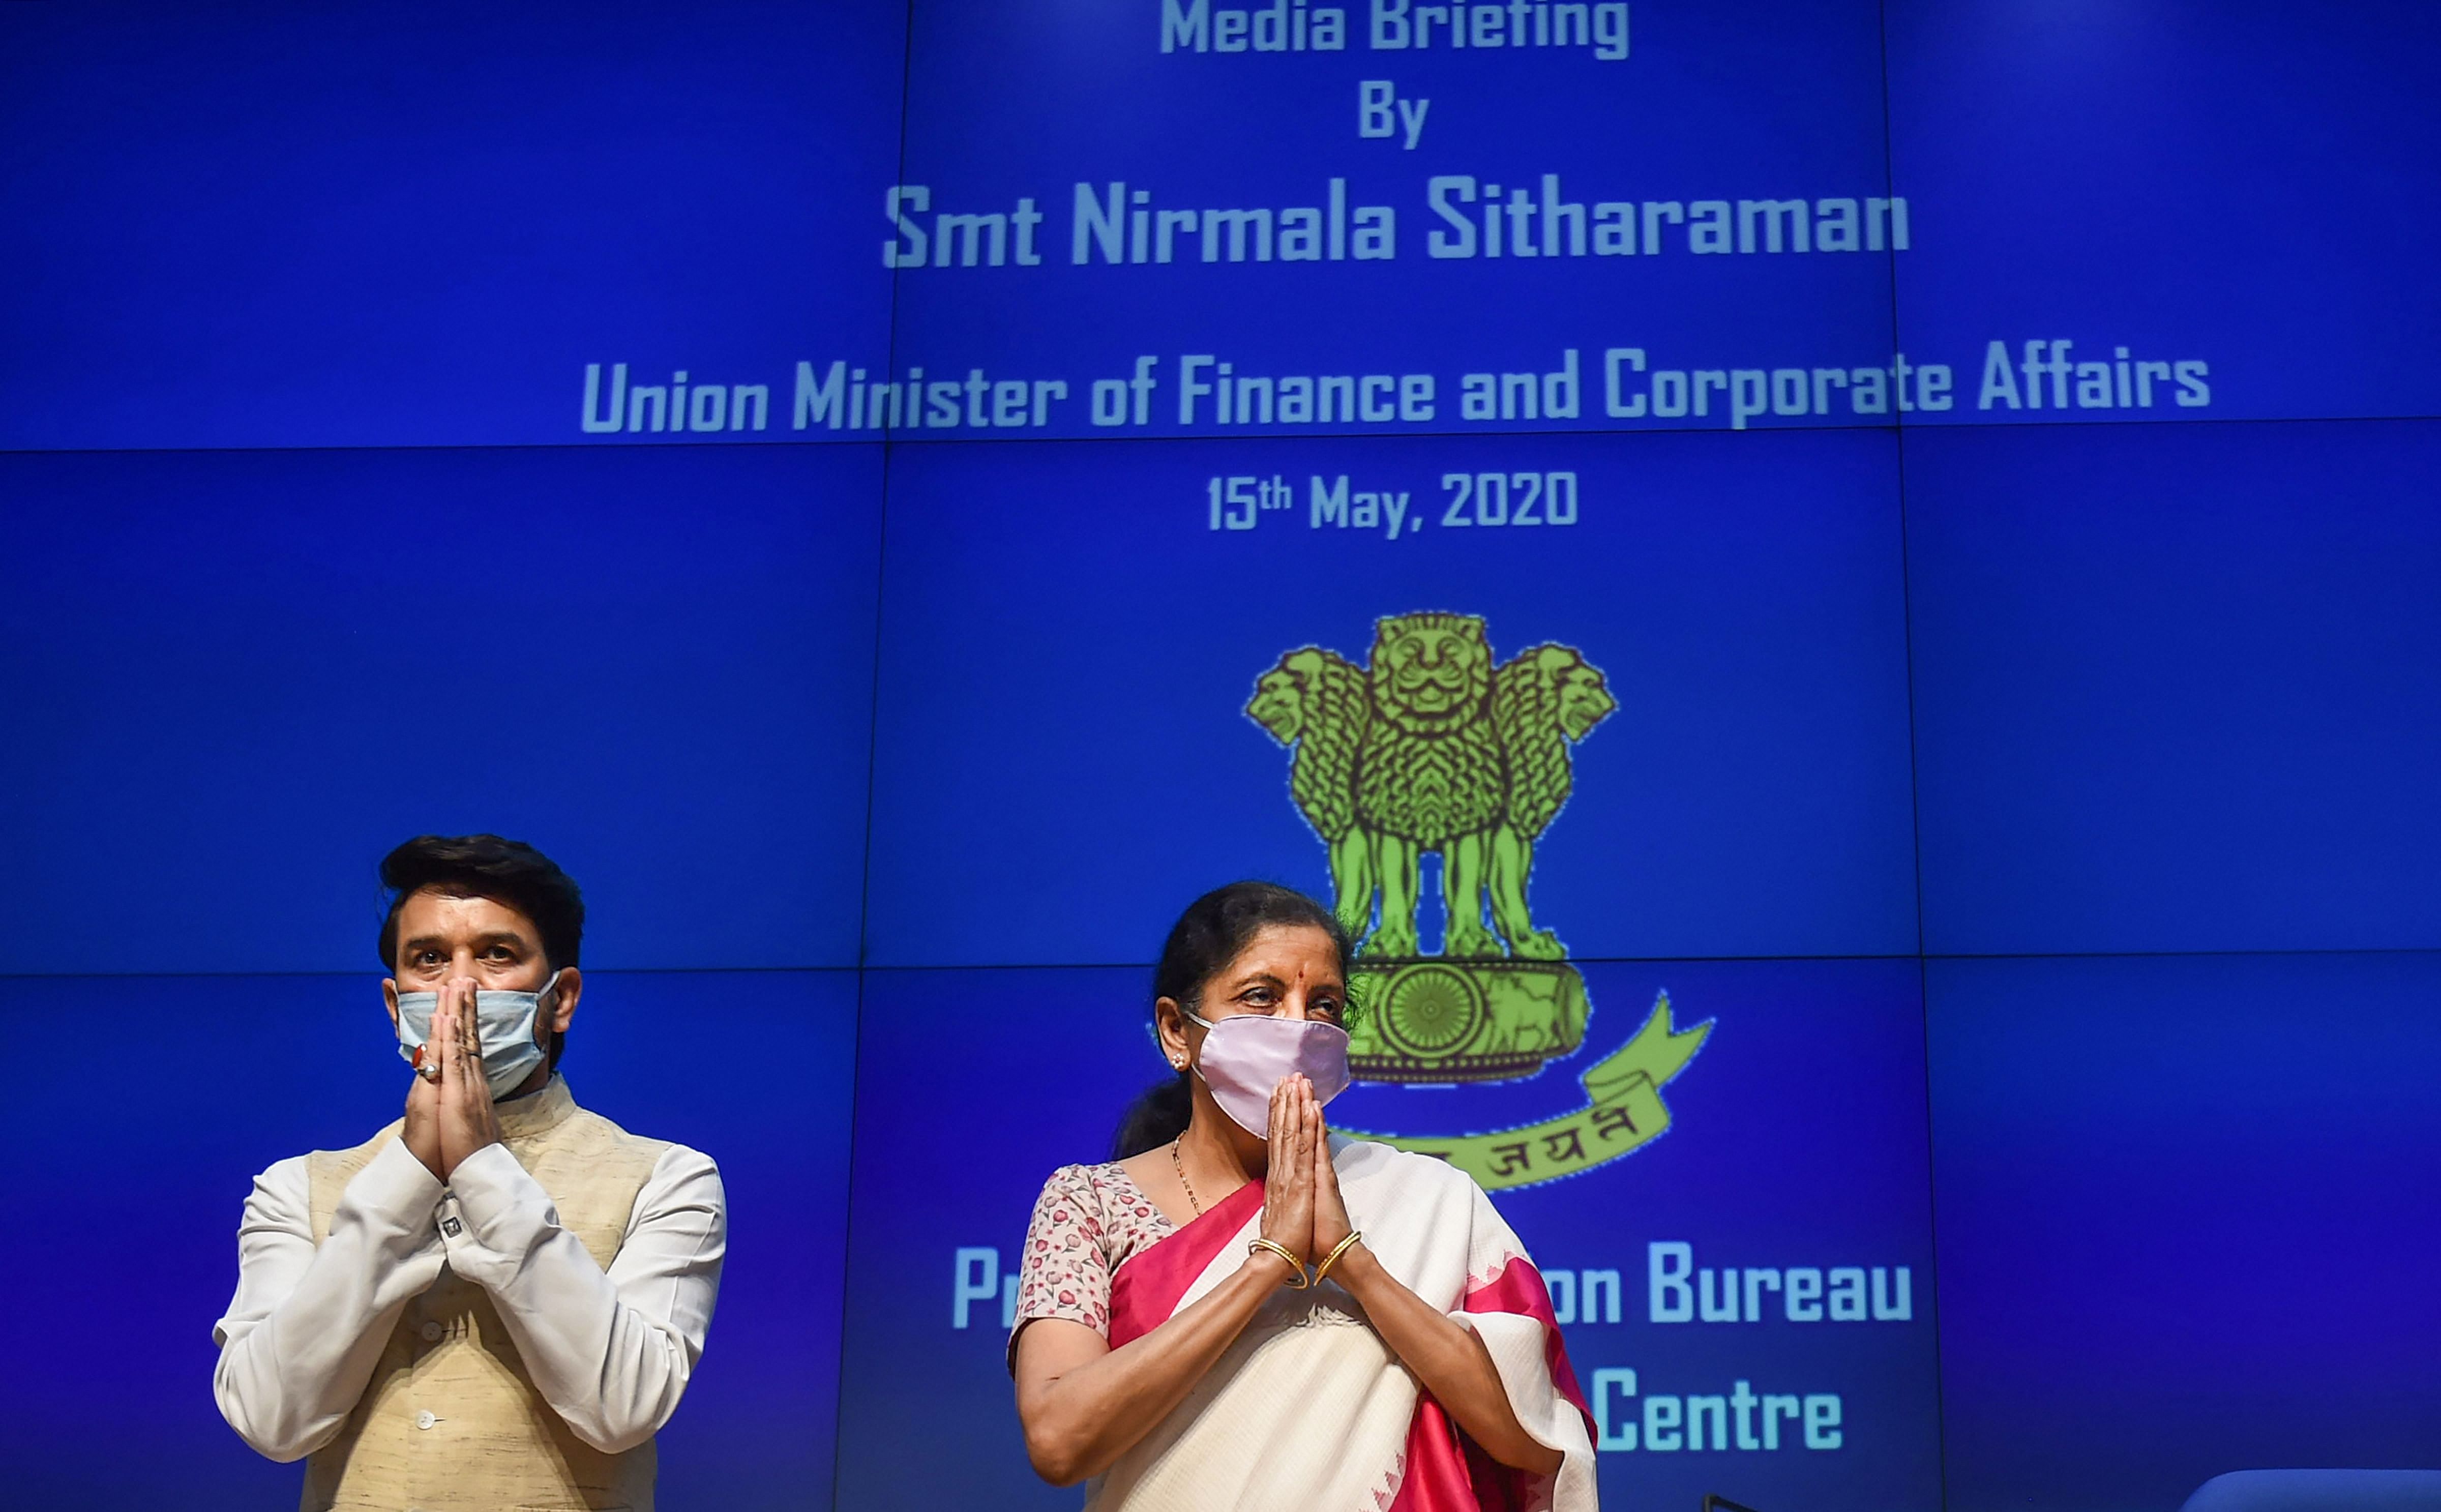 Union Finance Minister Nirmala Sitharaman along with MoS for Finance Anurag Thakur greets media personnel during a press conference, in New Delhi. (PTI)